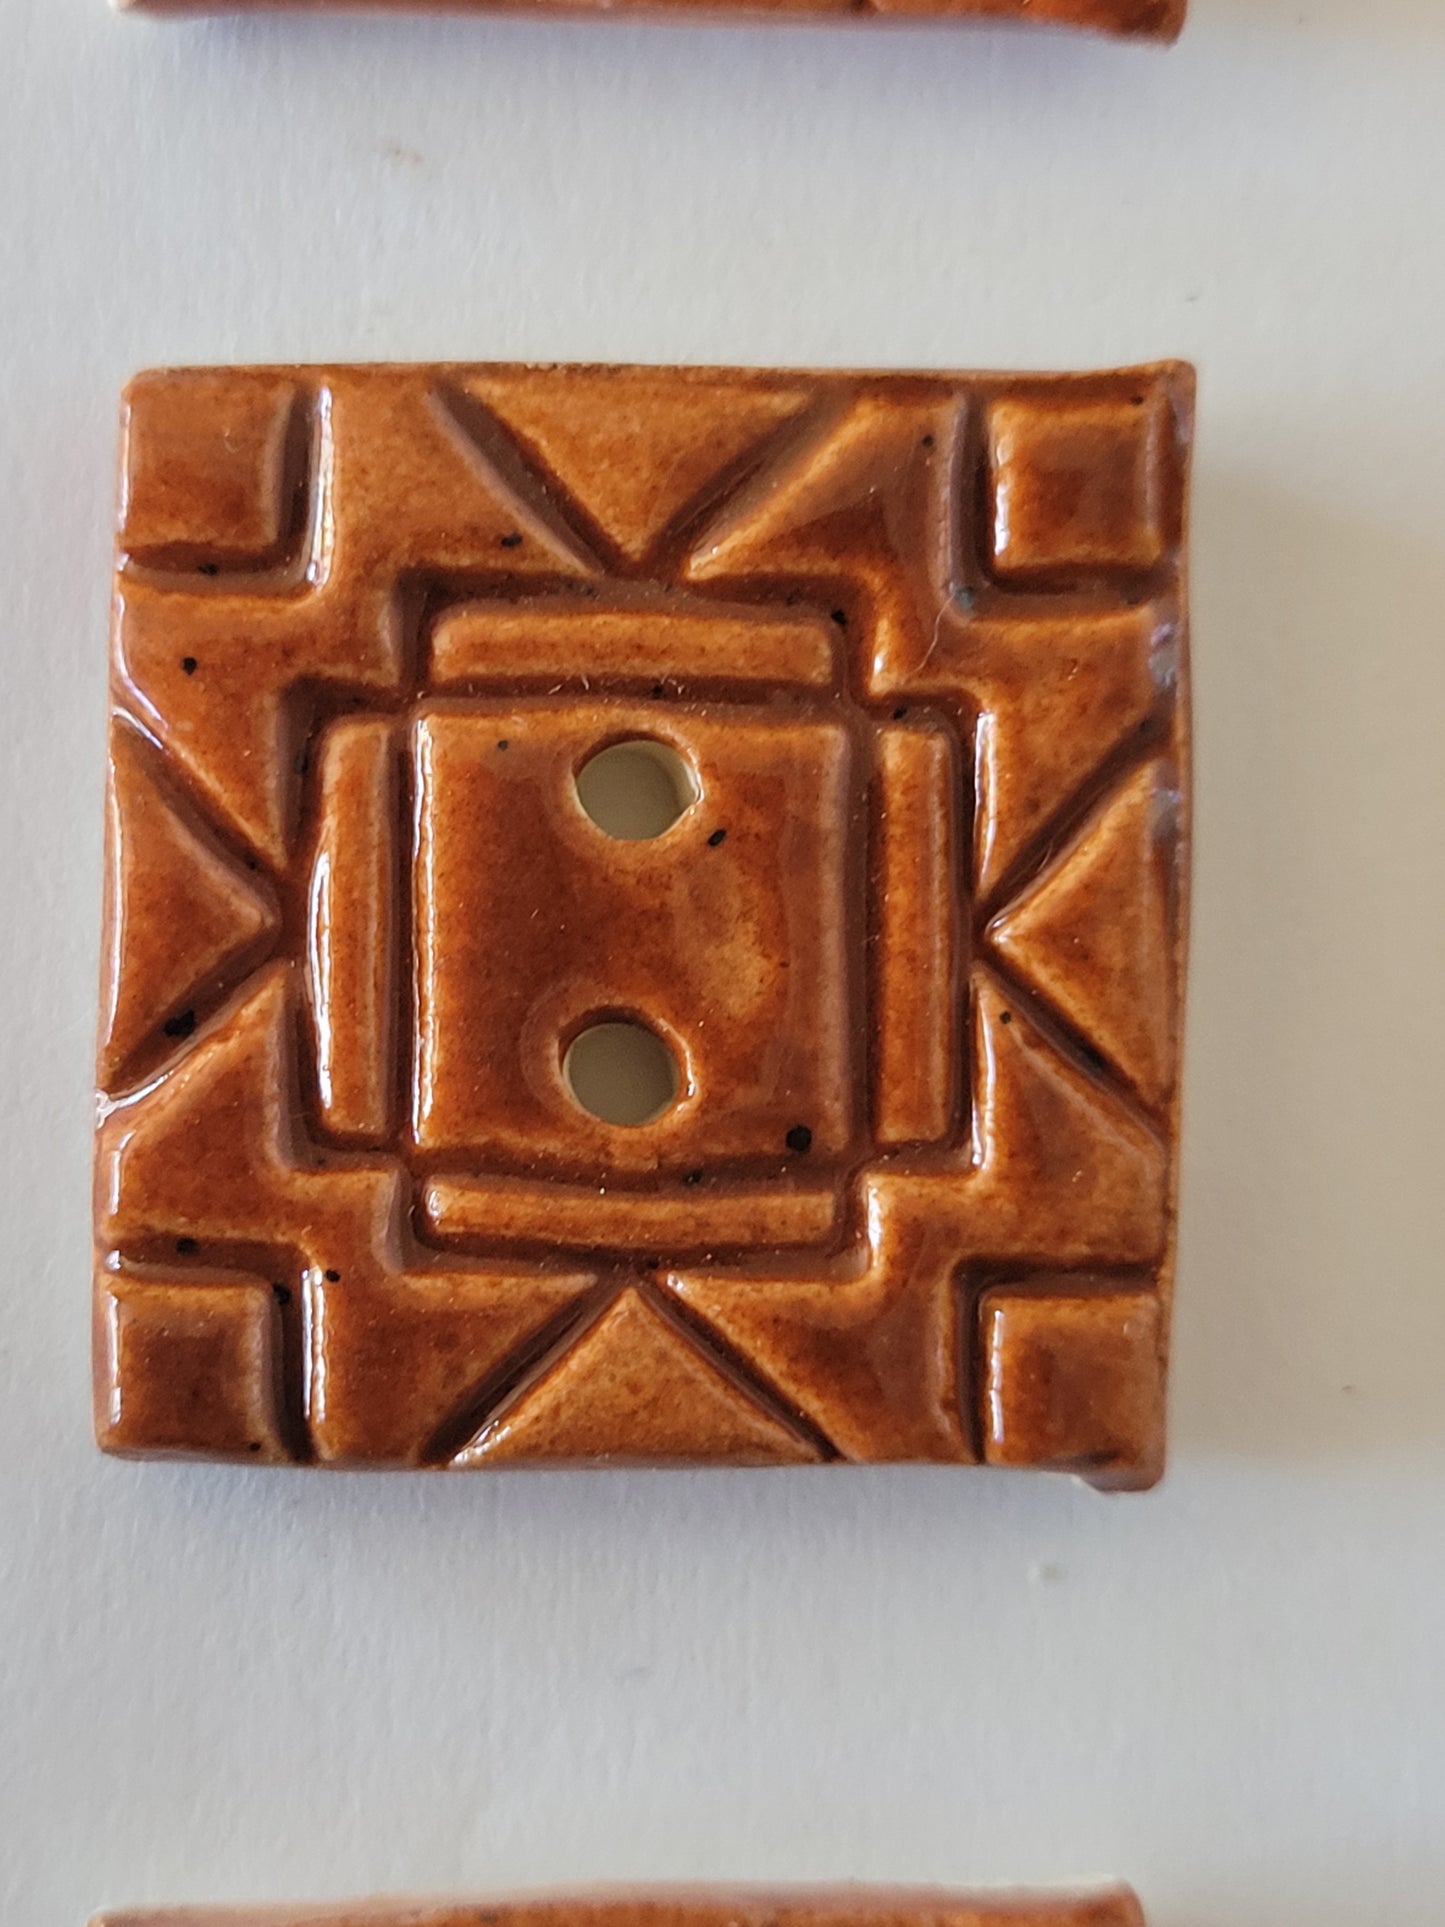 Set of 10 Square Aztec Inspired Buttons